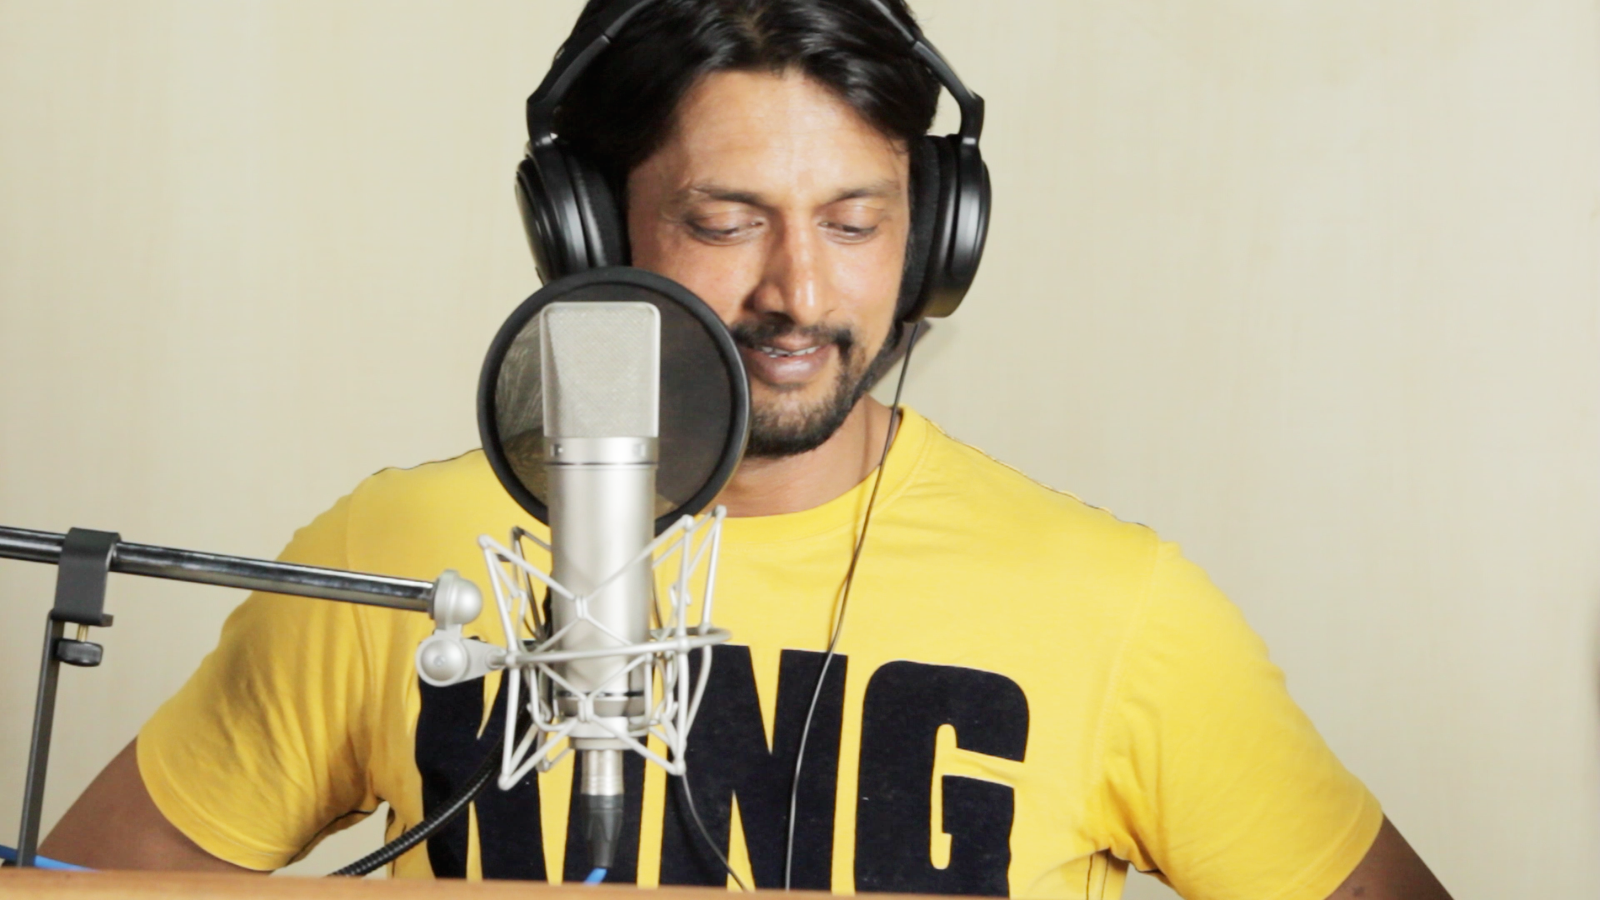 Why Did Sudeep Disapproved Fan’s Tweet?